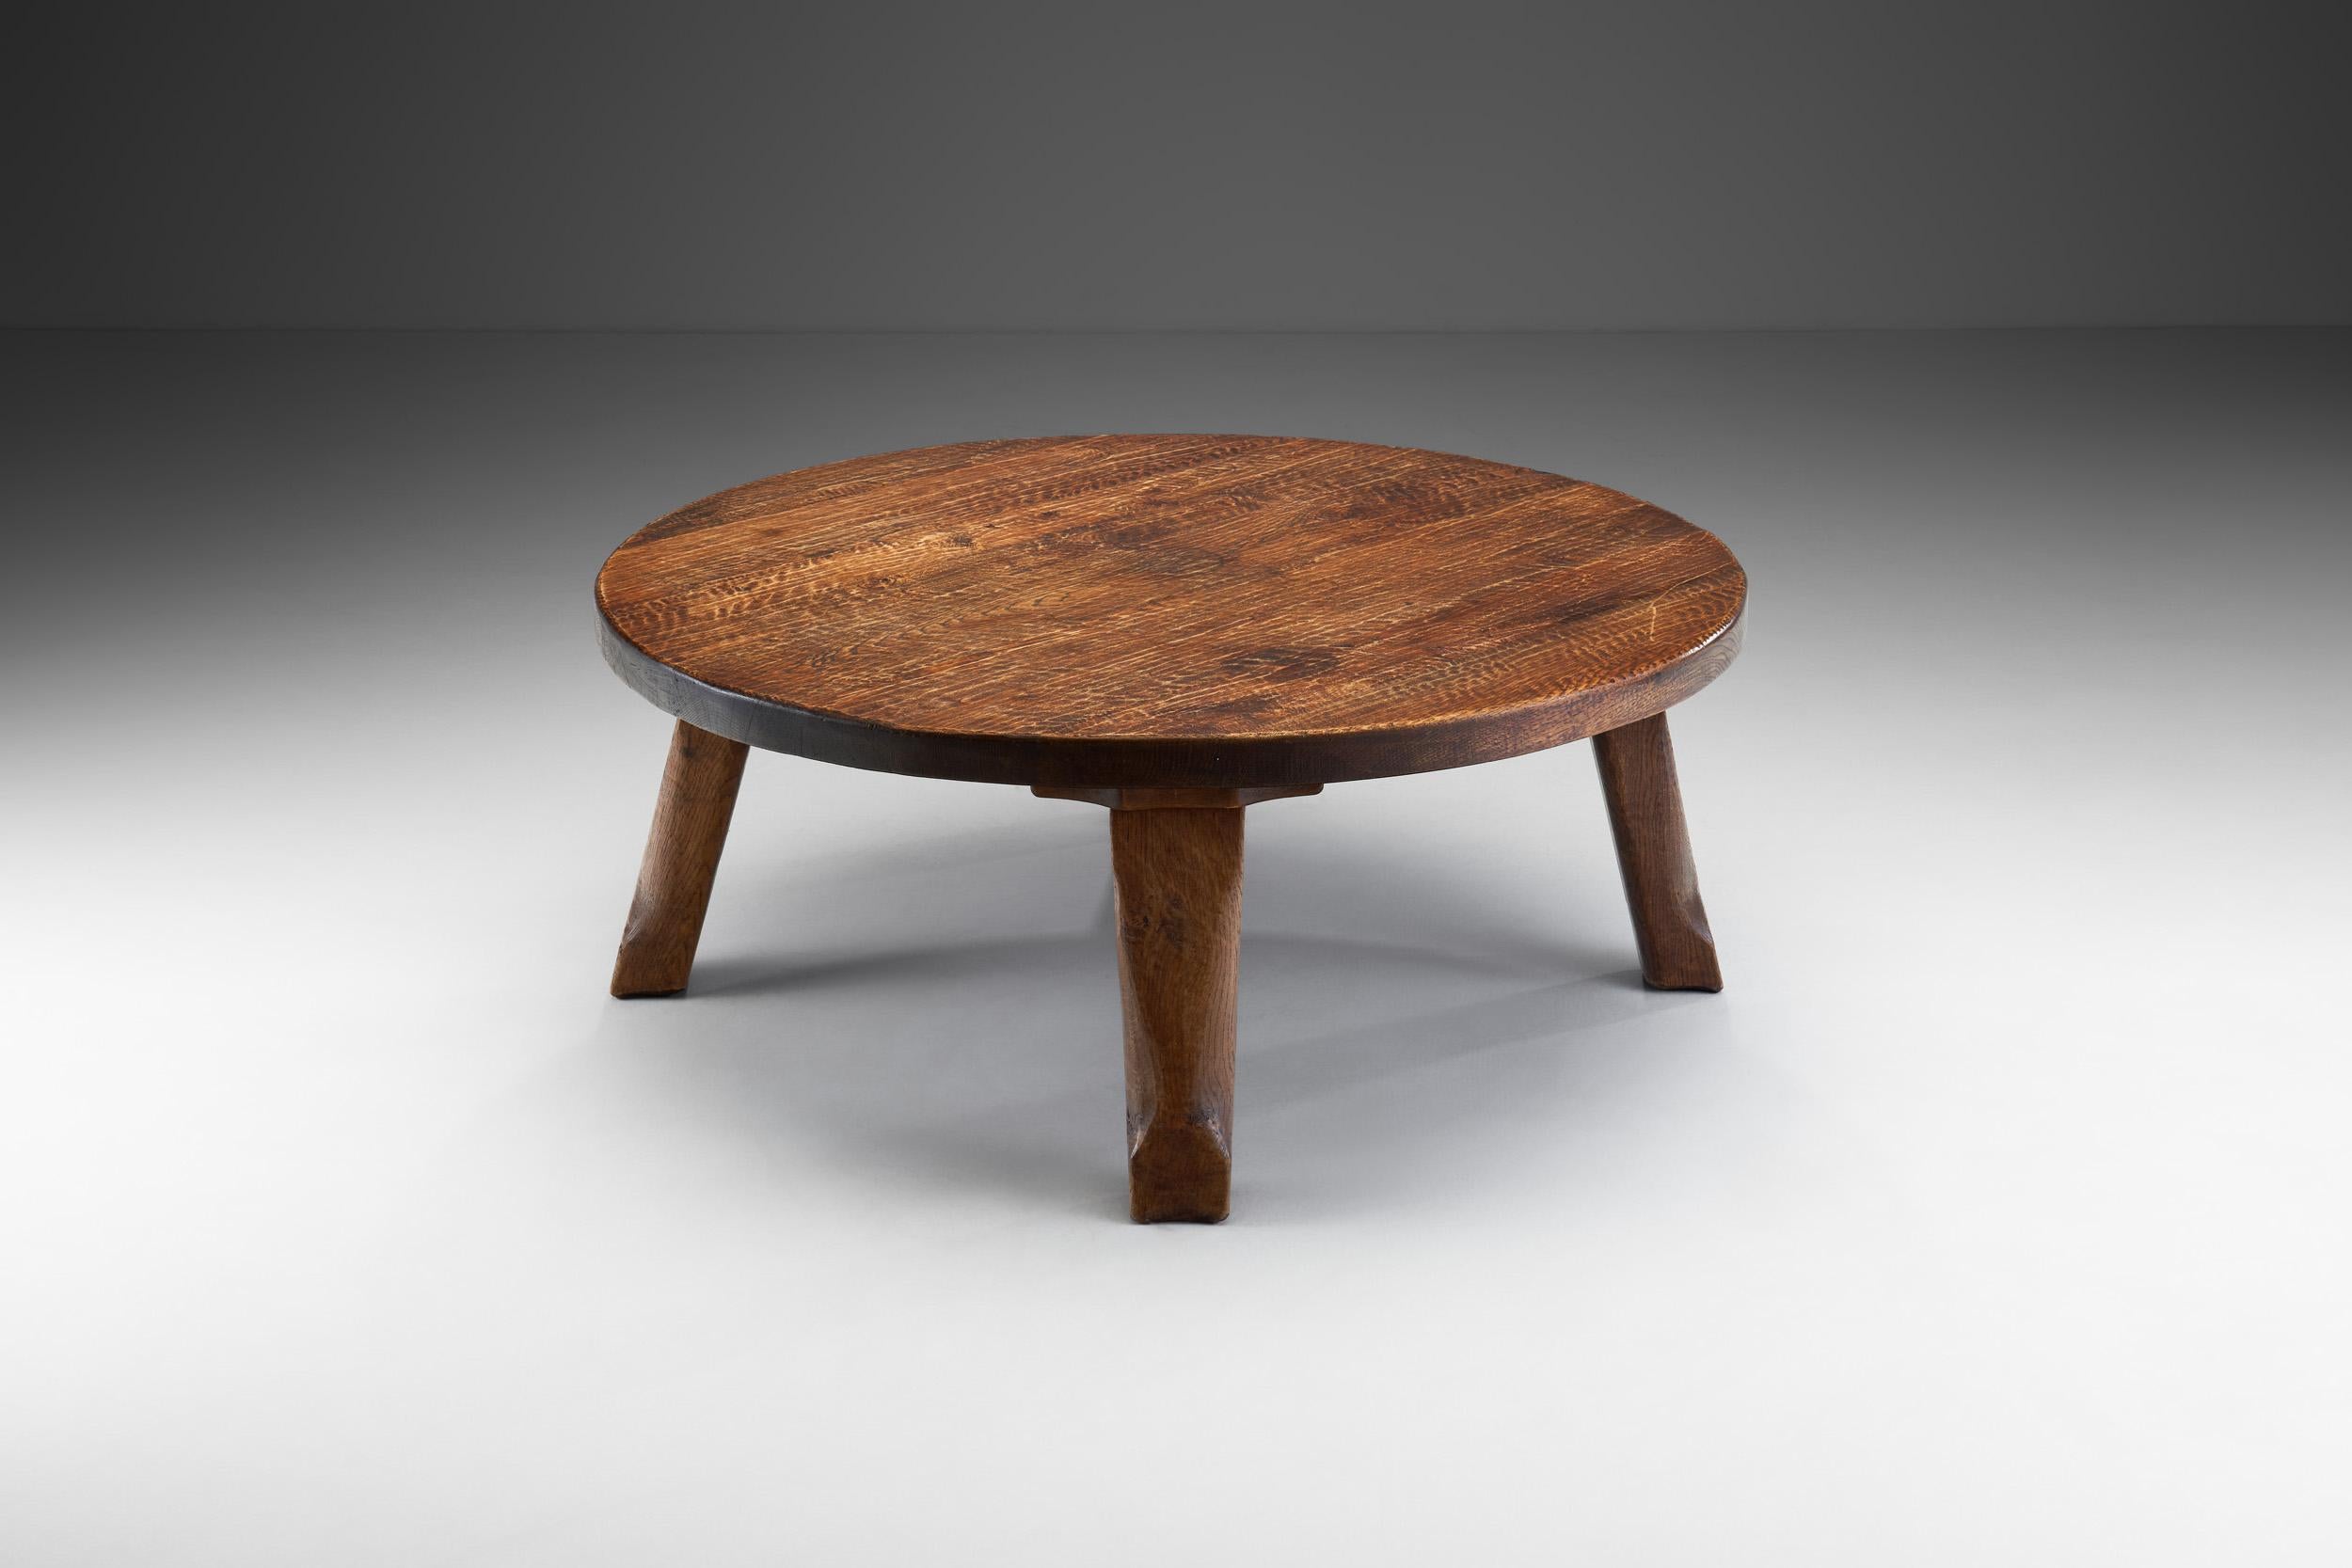 In European mid-century design, there are some common elements that define the continent’s furniture design of the era. Most importantly, there was an early emphasis on wood as it connected everyday objects, such as furniture to nature. This rustic,